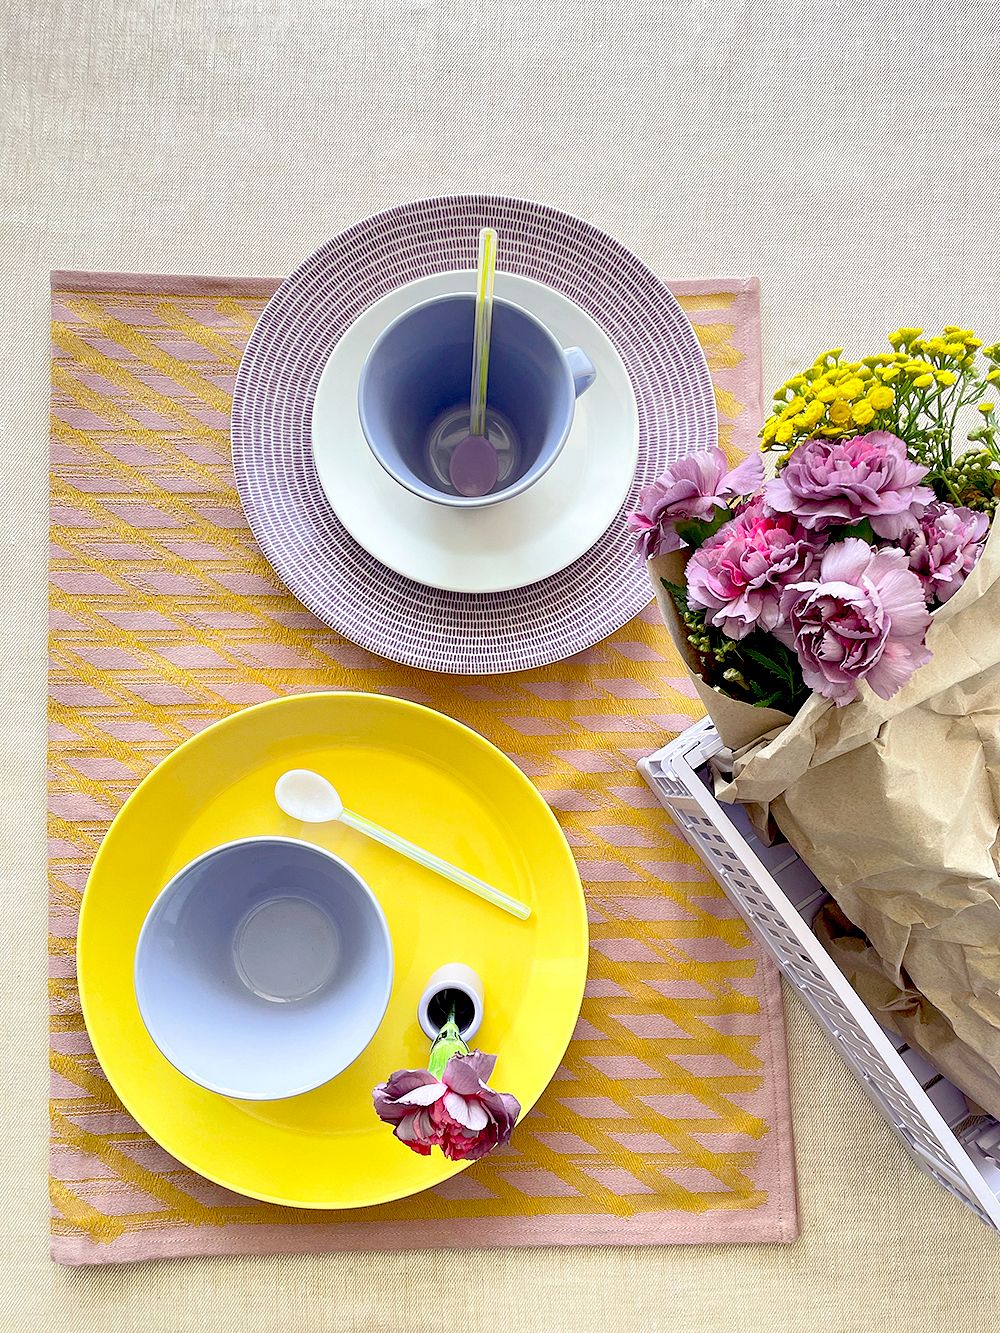 An image featuring Iittala's Teema tableware, Arabia's KoKo tableware and HAY's lavender Color Crate box in a colorful table setting, as part of the dining area decor. 